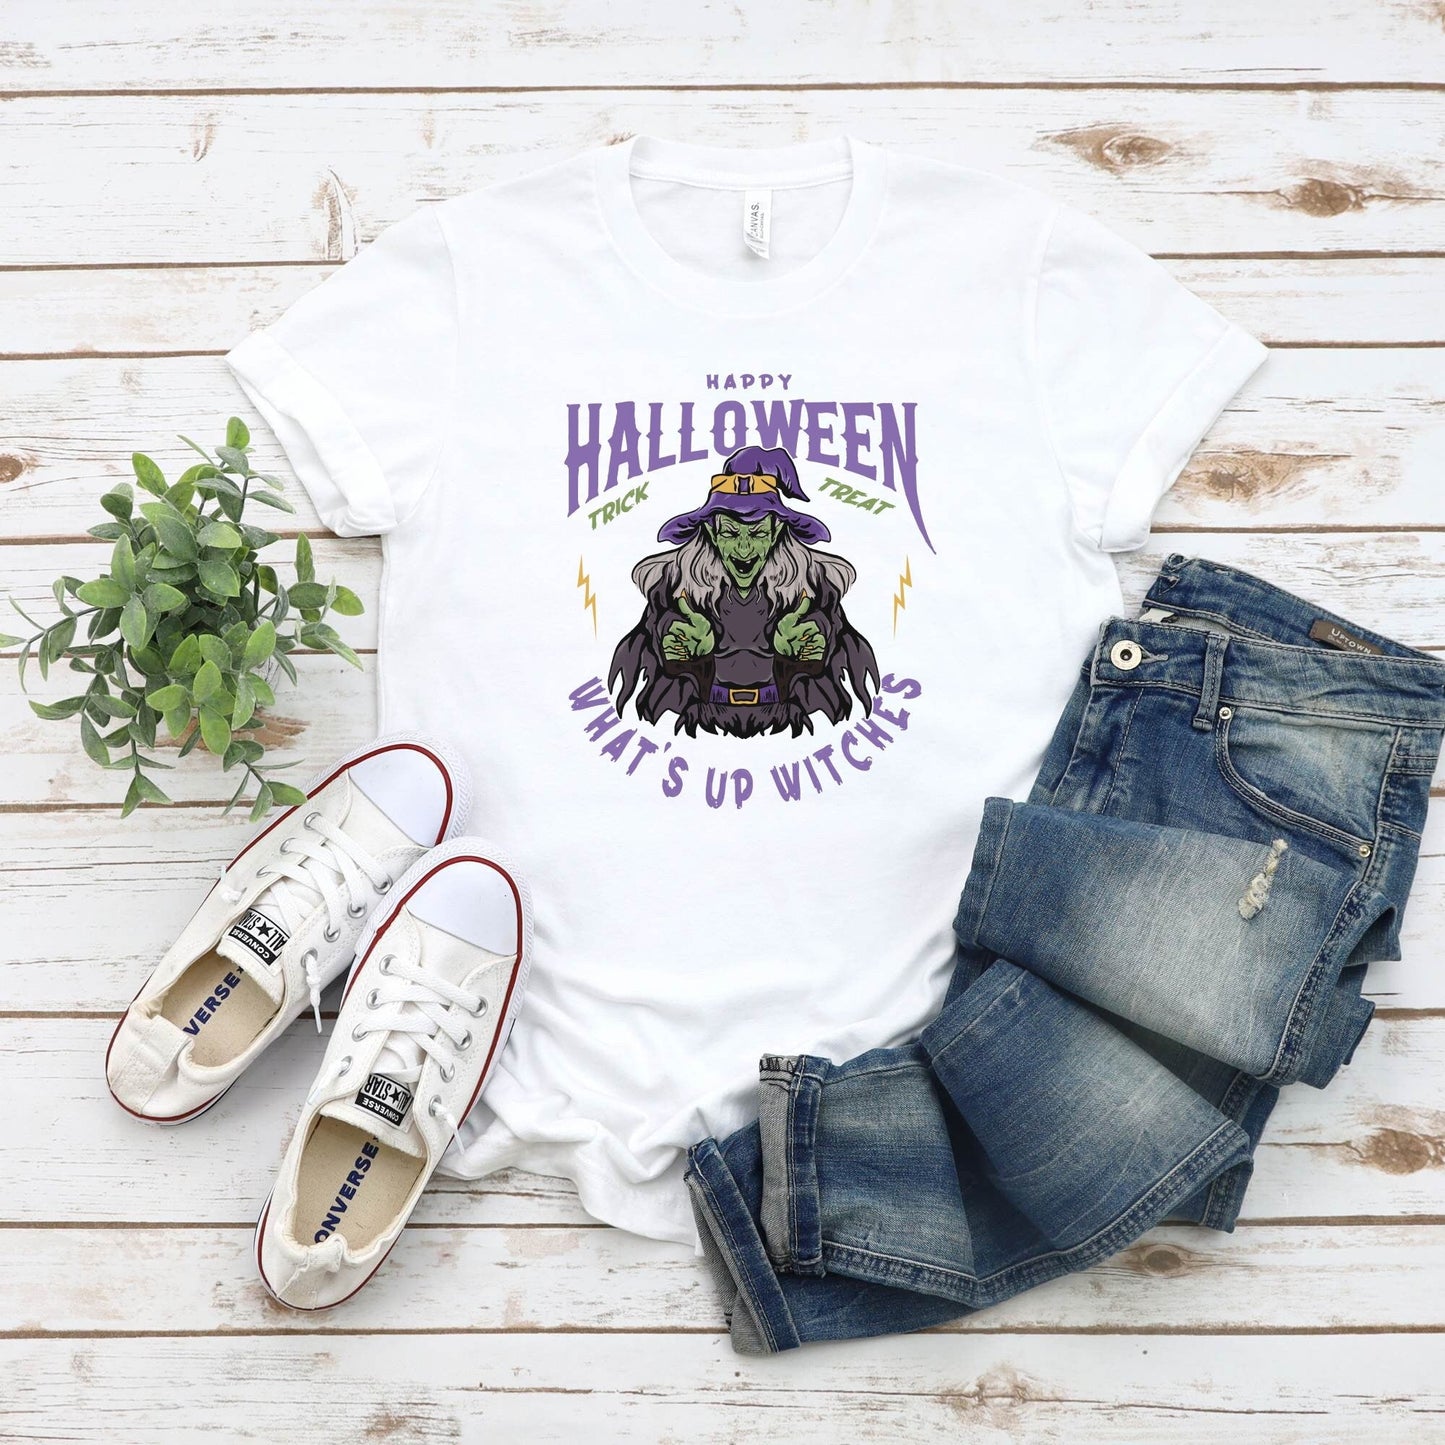 Happy Halloween What's Up Witches, Funny Halloween Shirt, Halloween Shirts, Funny Shirts, For Women, Cute Shirts, Teacher Shirt